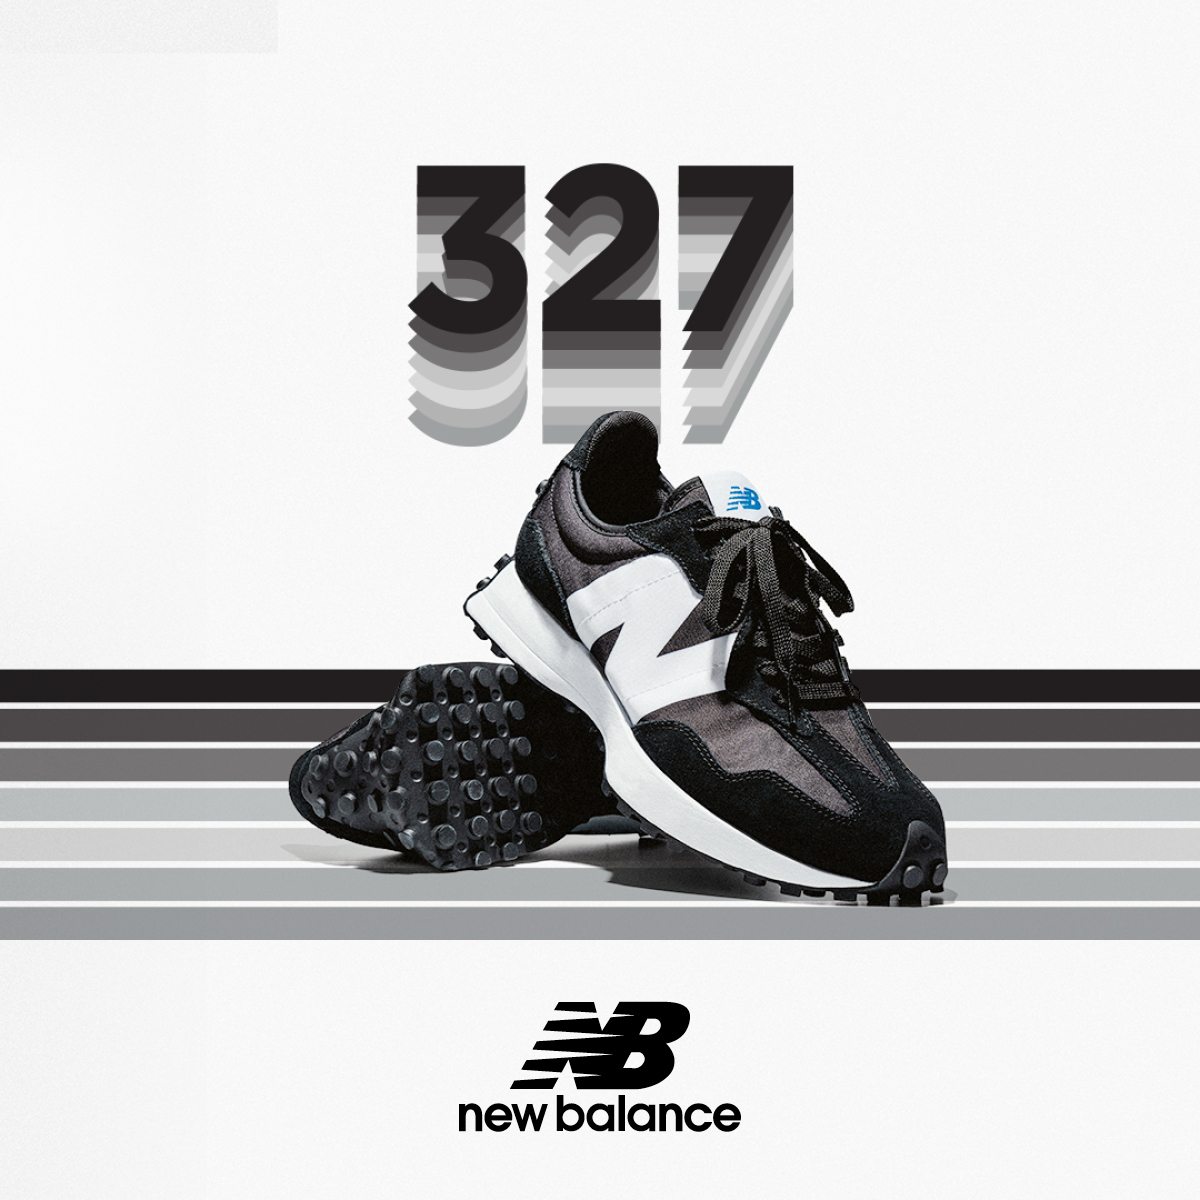 Just Dropped: New Balance 327 for Men 